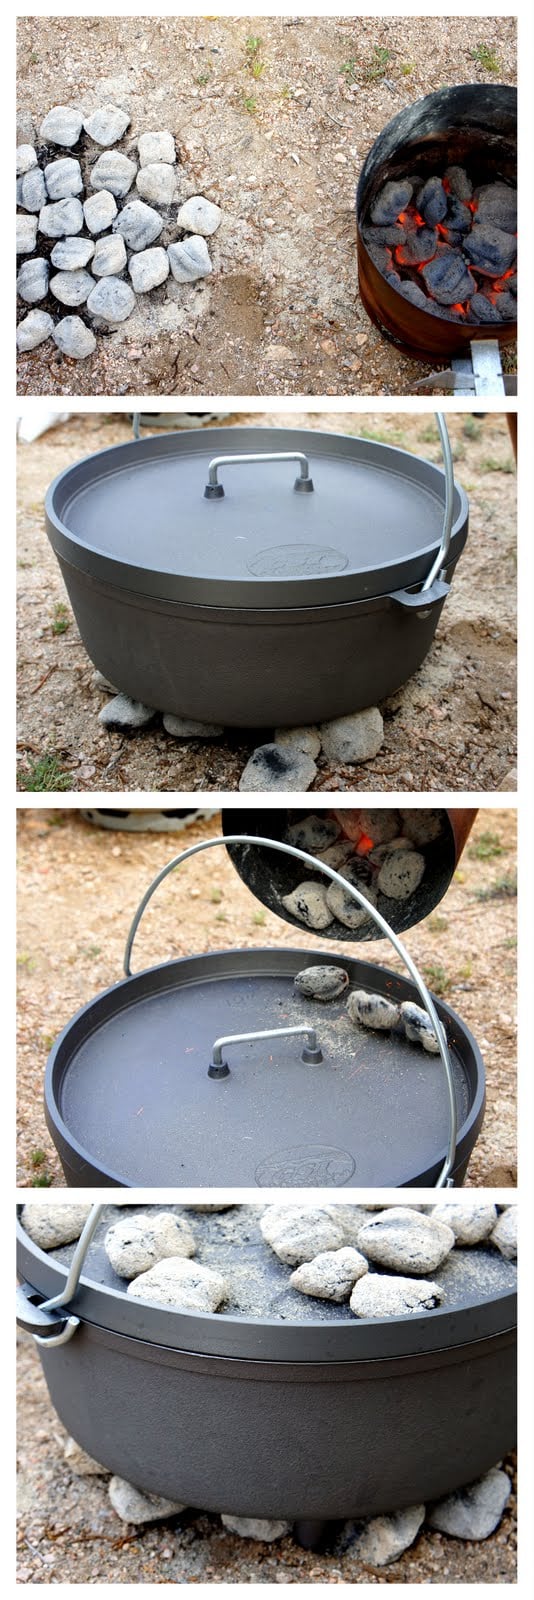 A demonstration on how to use and place hot coals around the Dutch Oven to cook the food in it